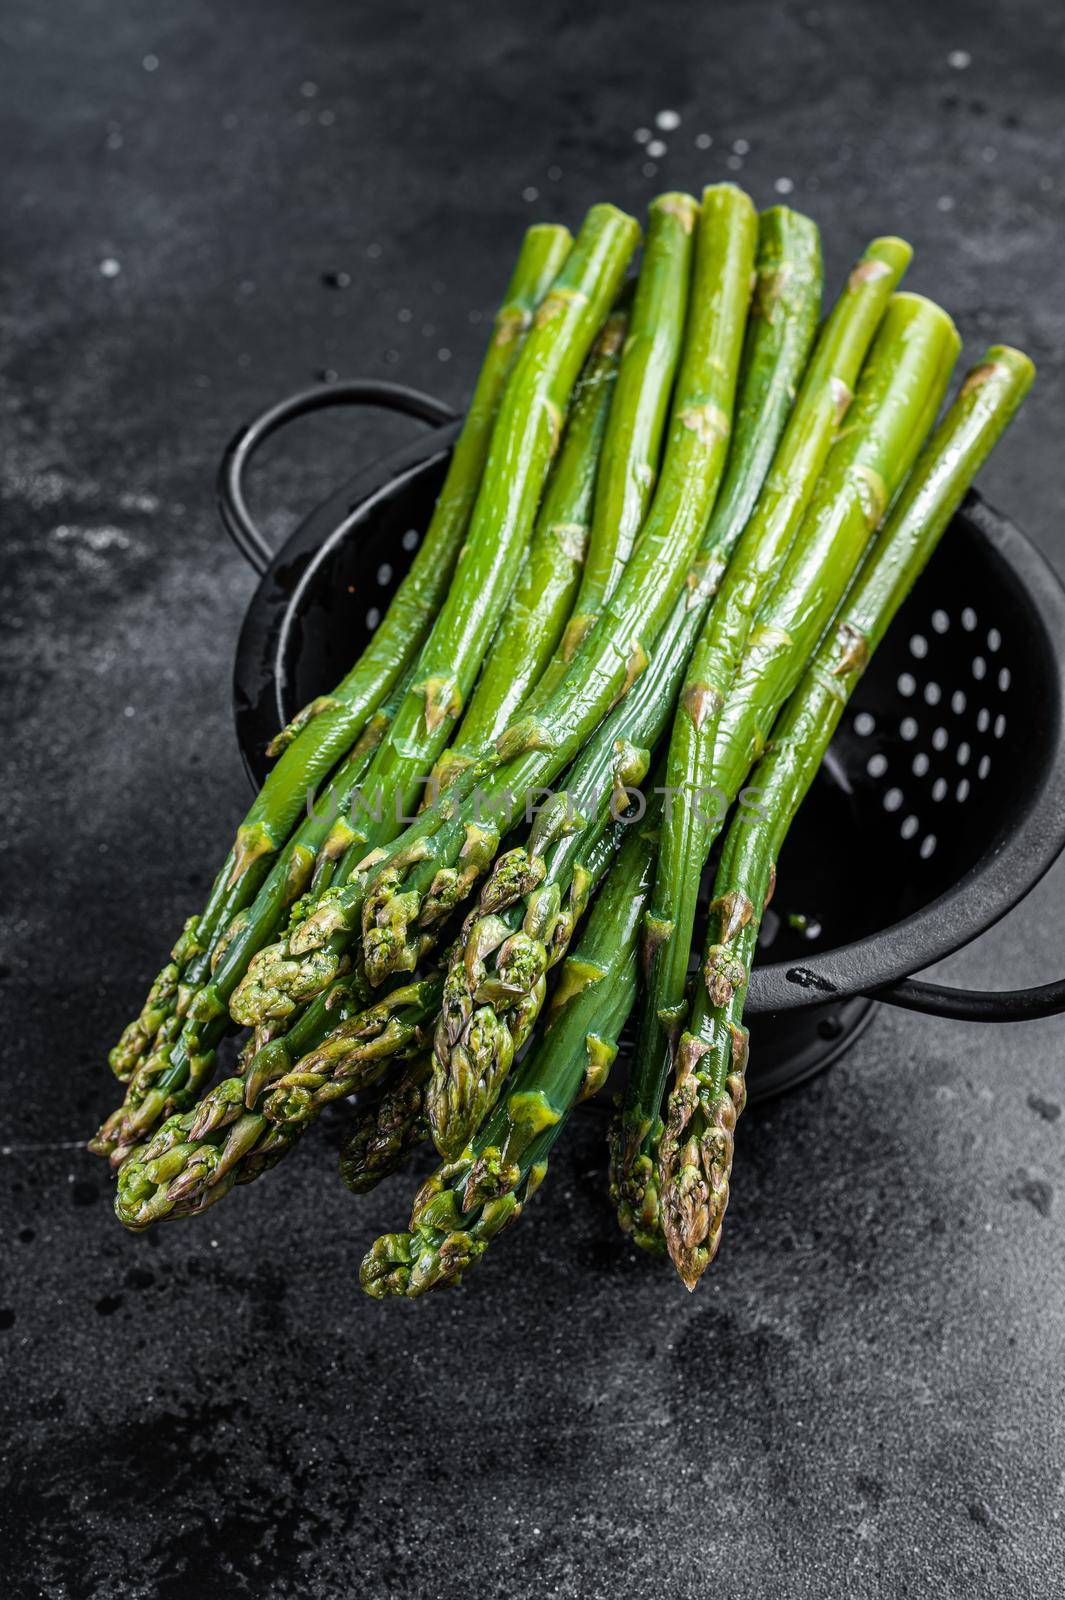 Raw green asparagus in a old colander. Black background. Top view.